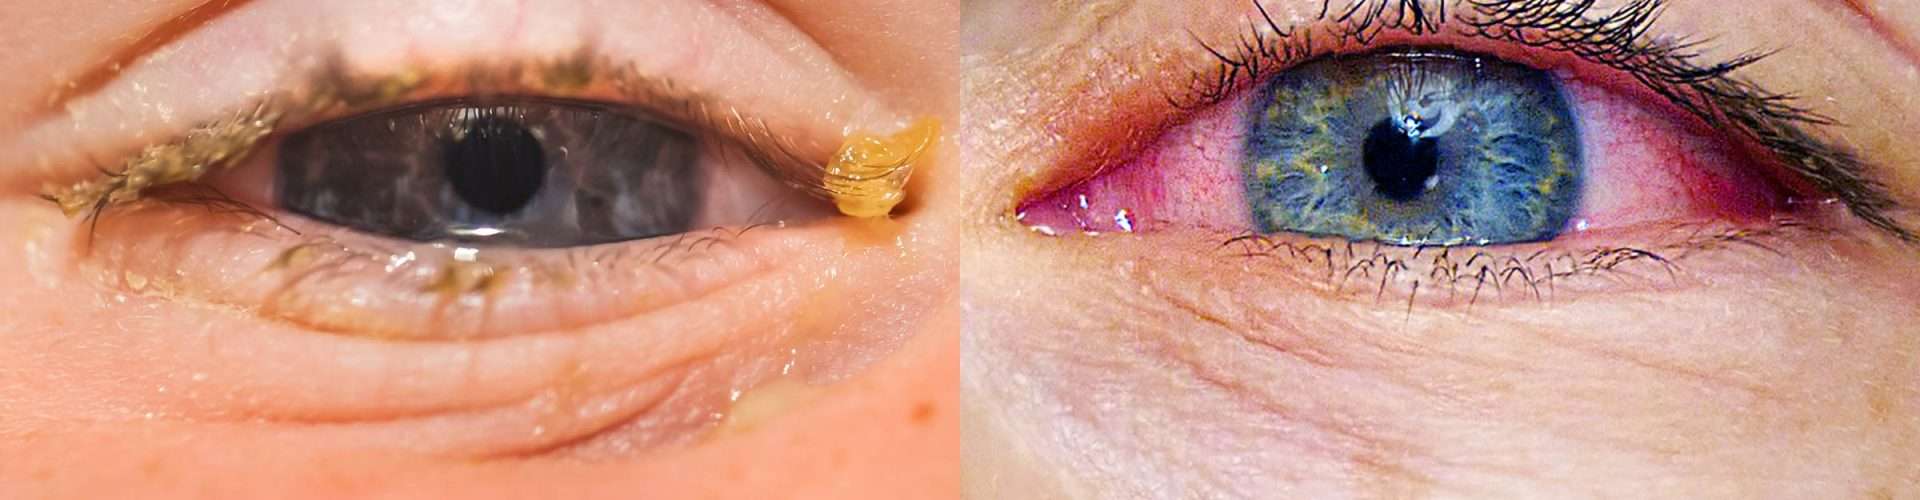 Allergies or Pink Eye: Heres How to Tell the Difference